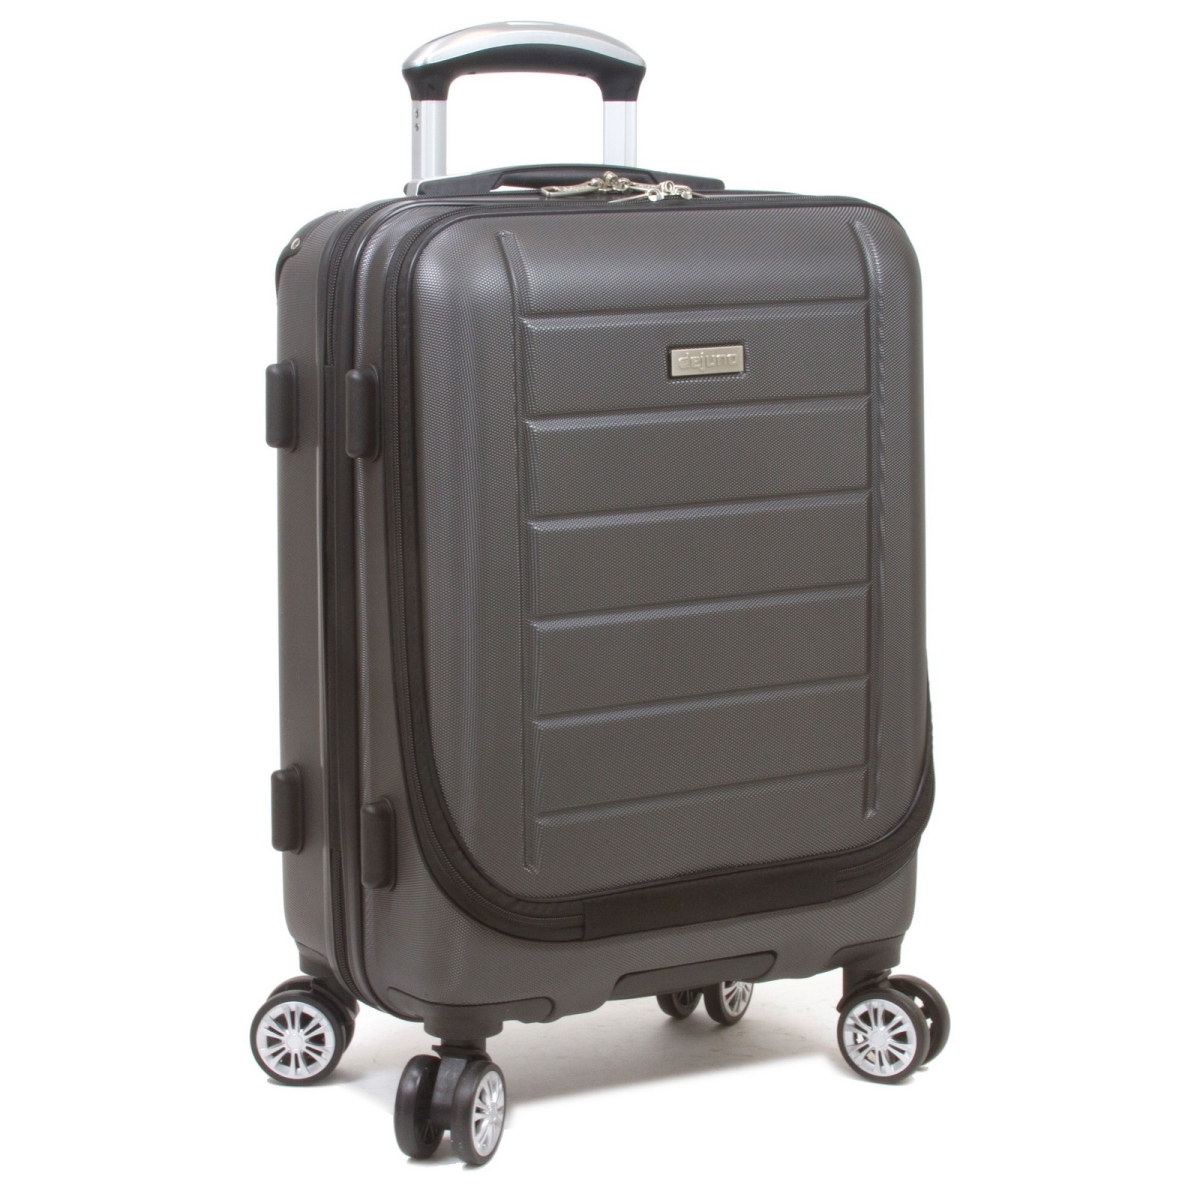 25dj-9902-charcoal 20 In. Compact Hardside Carry-on Luggage With Laptop Pocket, Charcoal